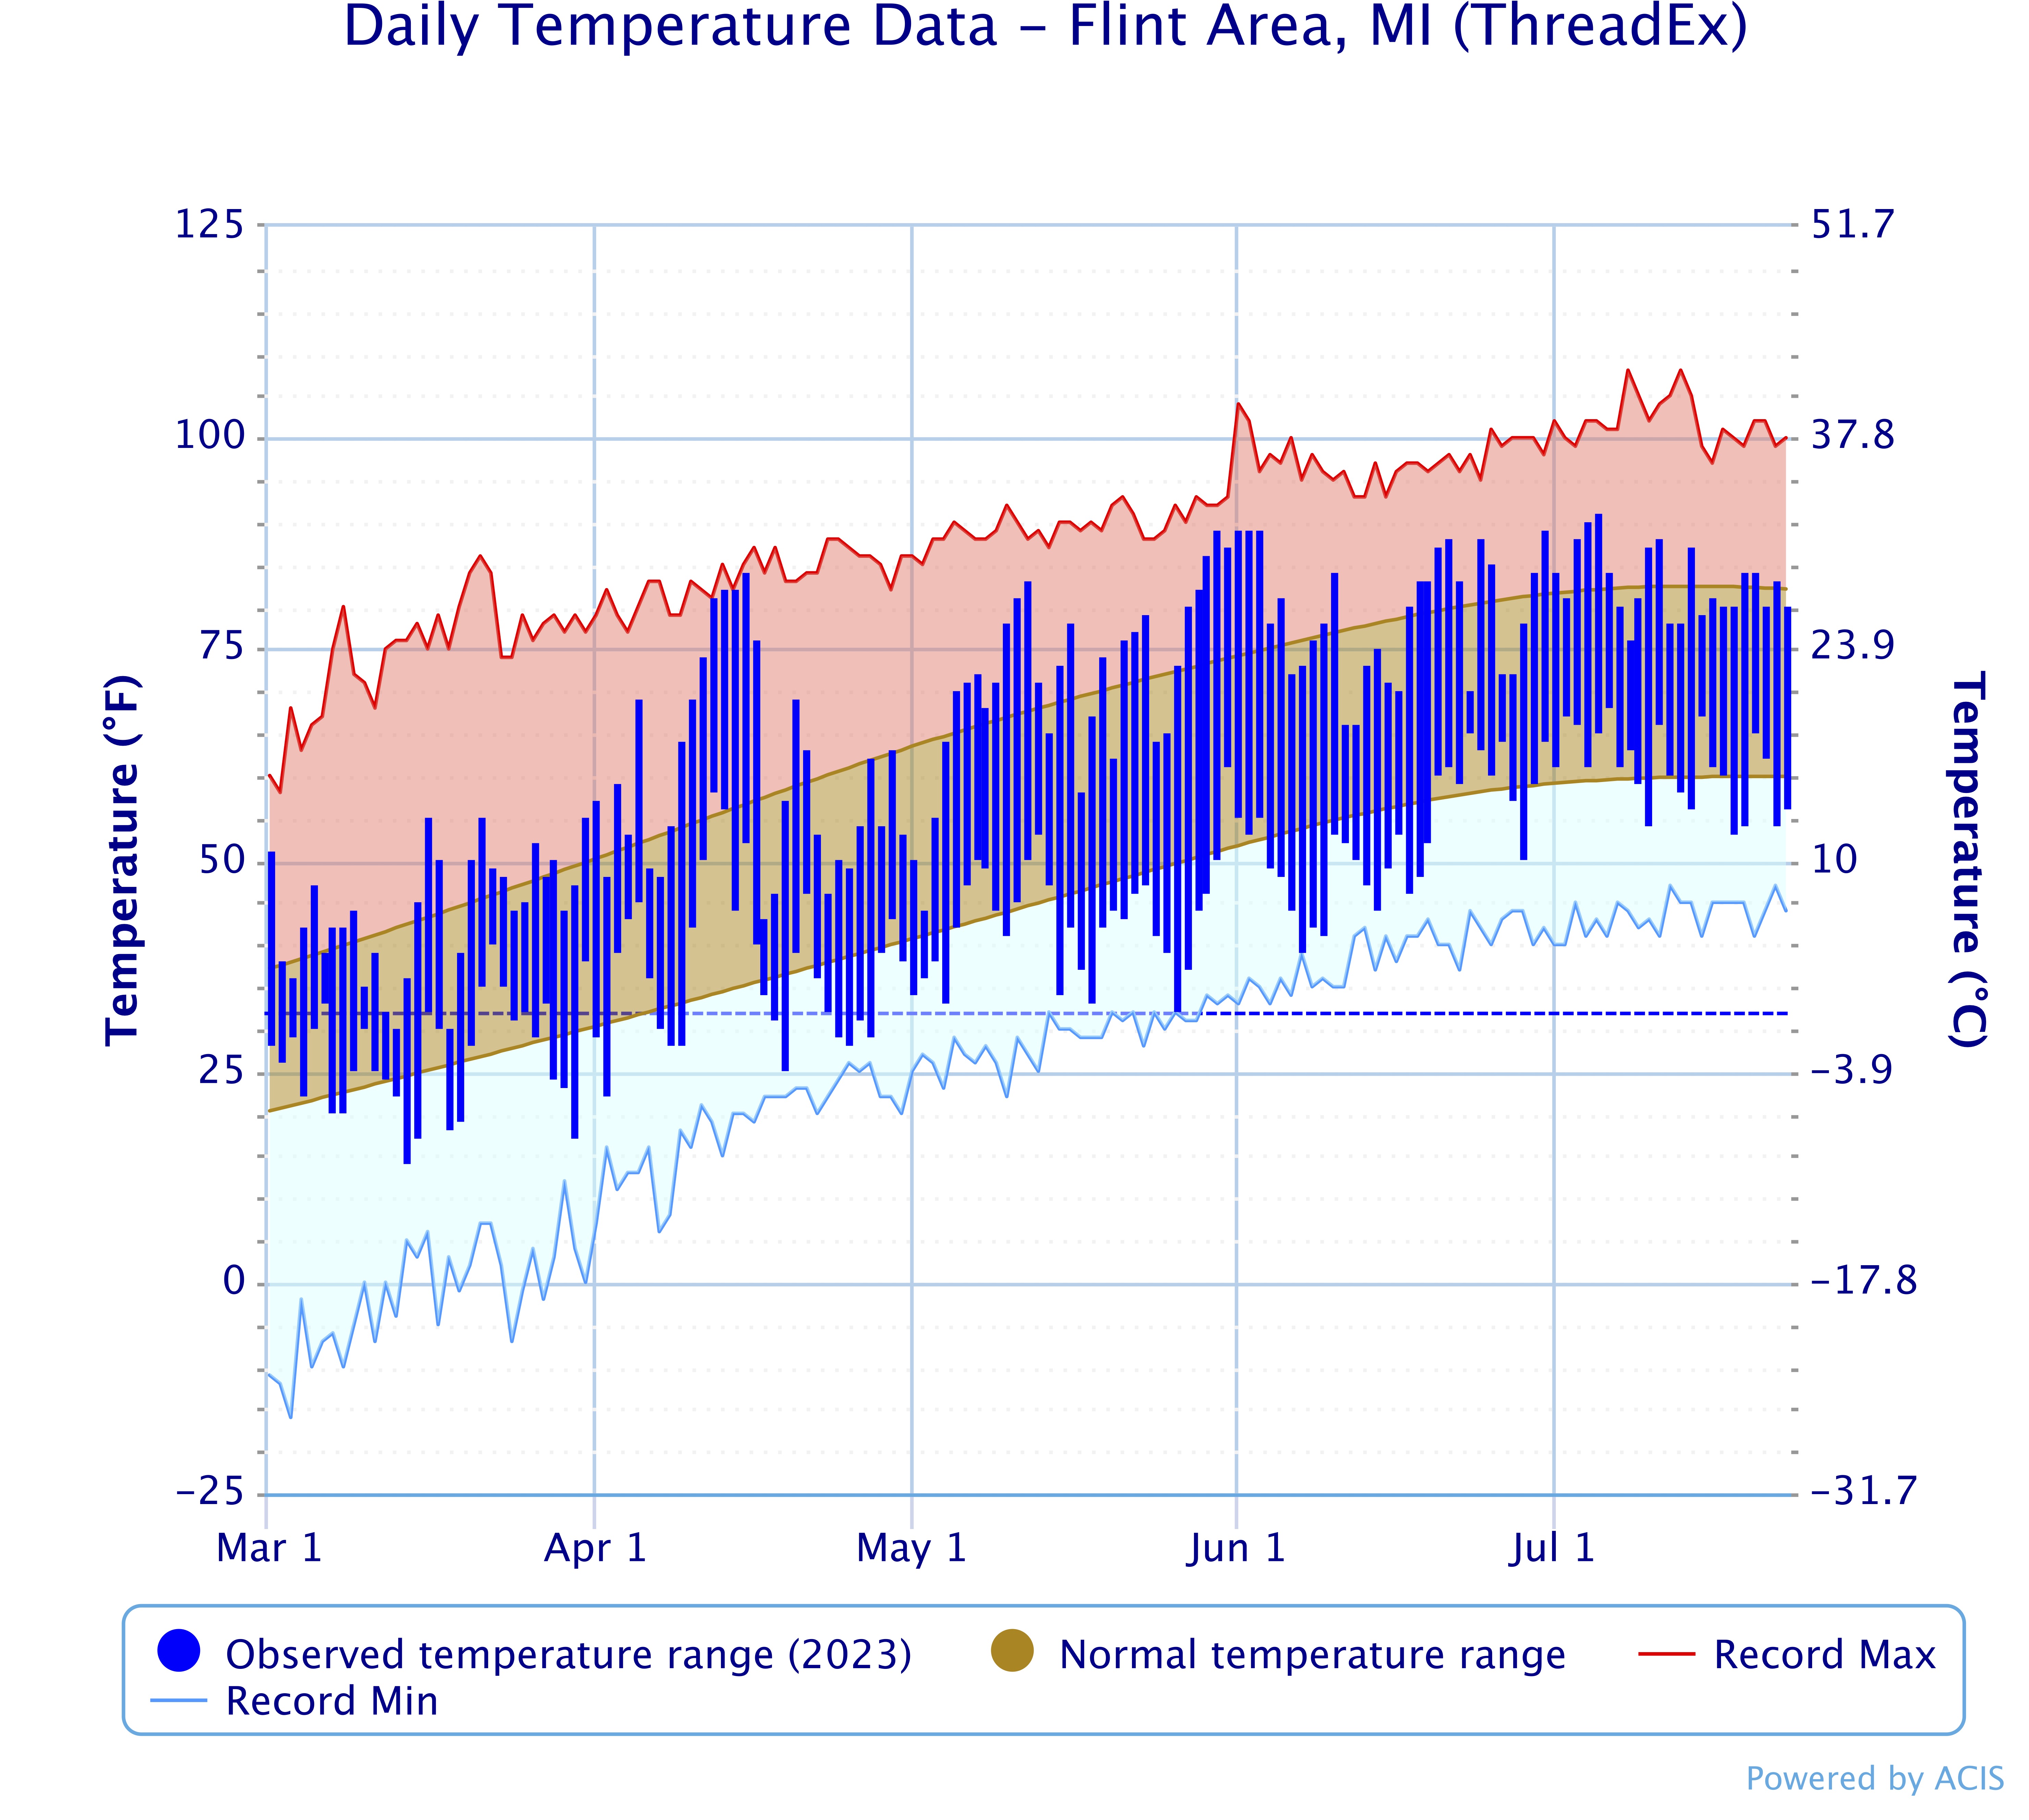 Daily temperature chart from March 1-July 23, 2023 with average low and high temperatures